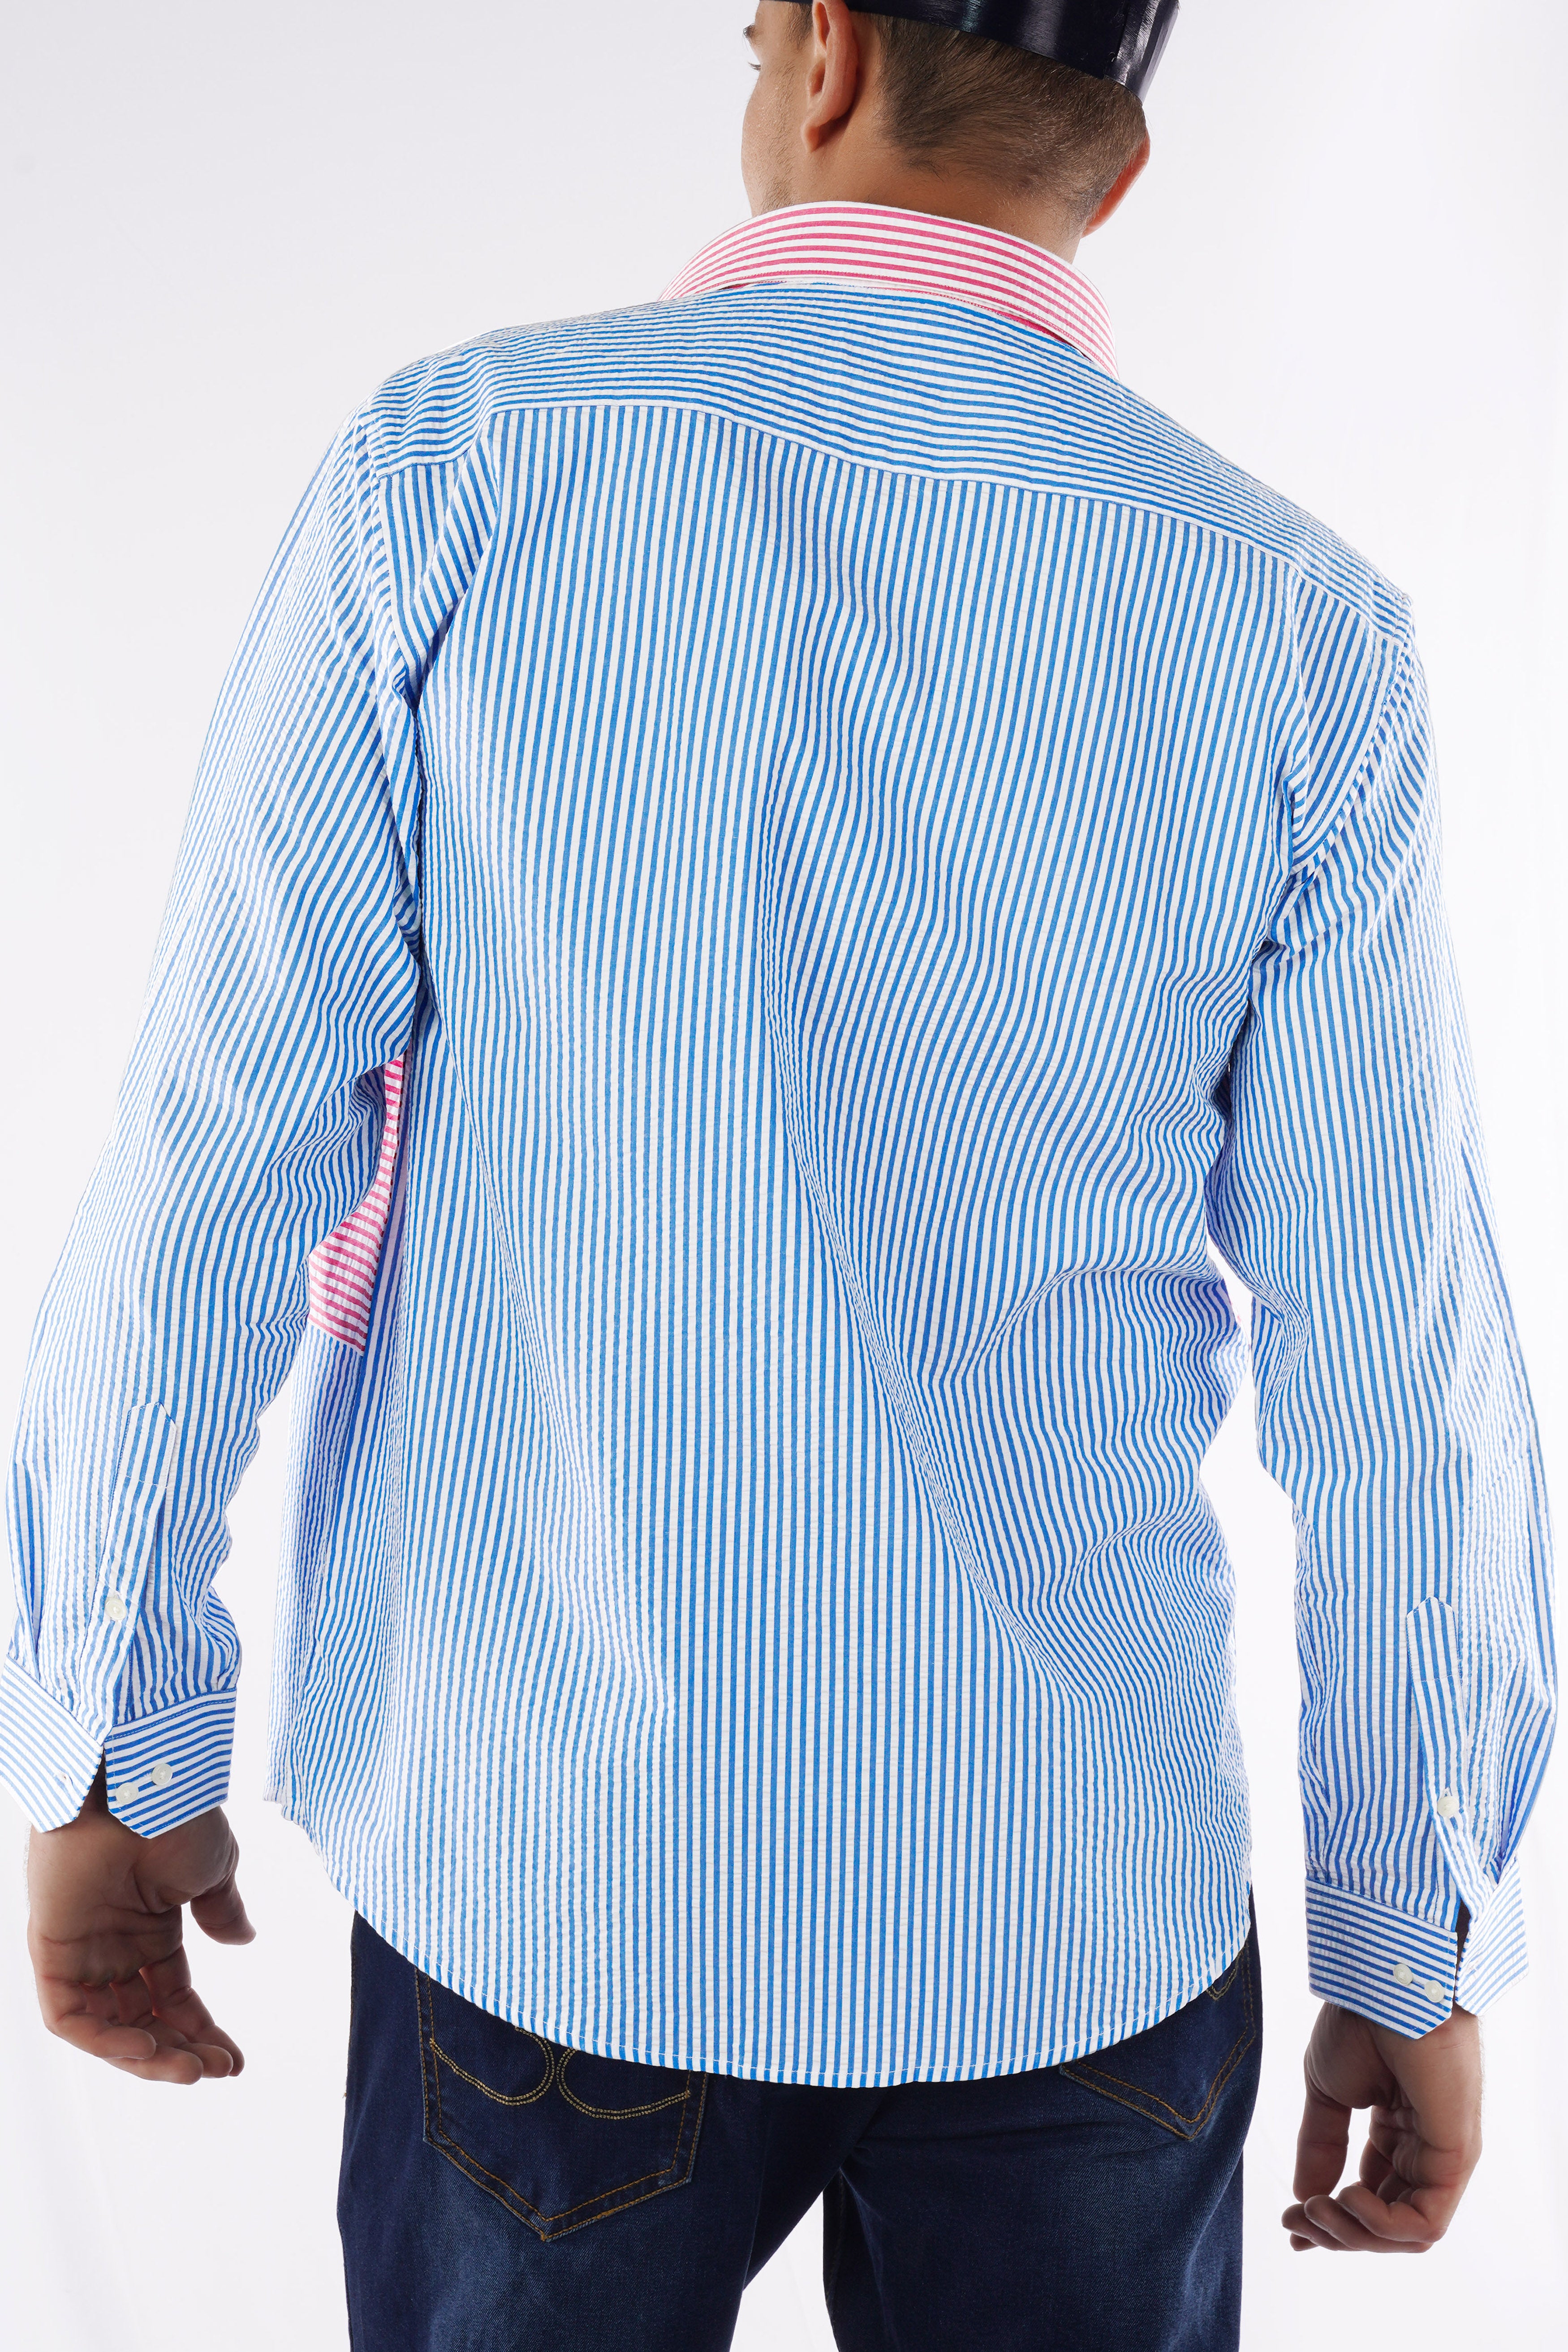 Glacial Blue with White and Thulian Pink Striped Seersucker Designer Shirt